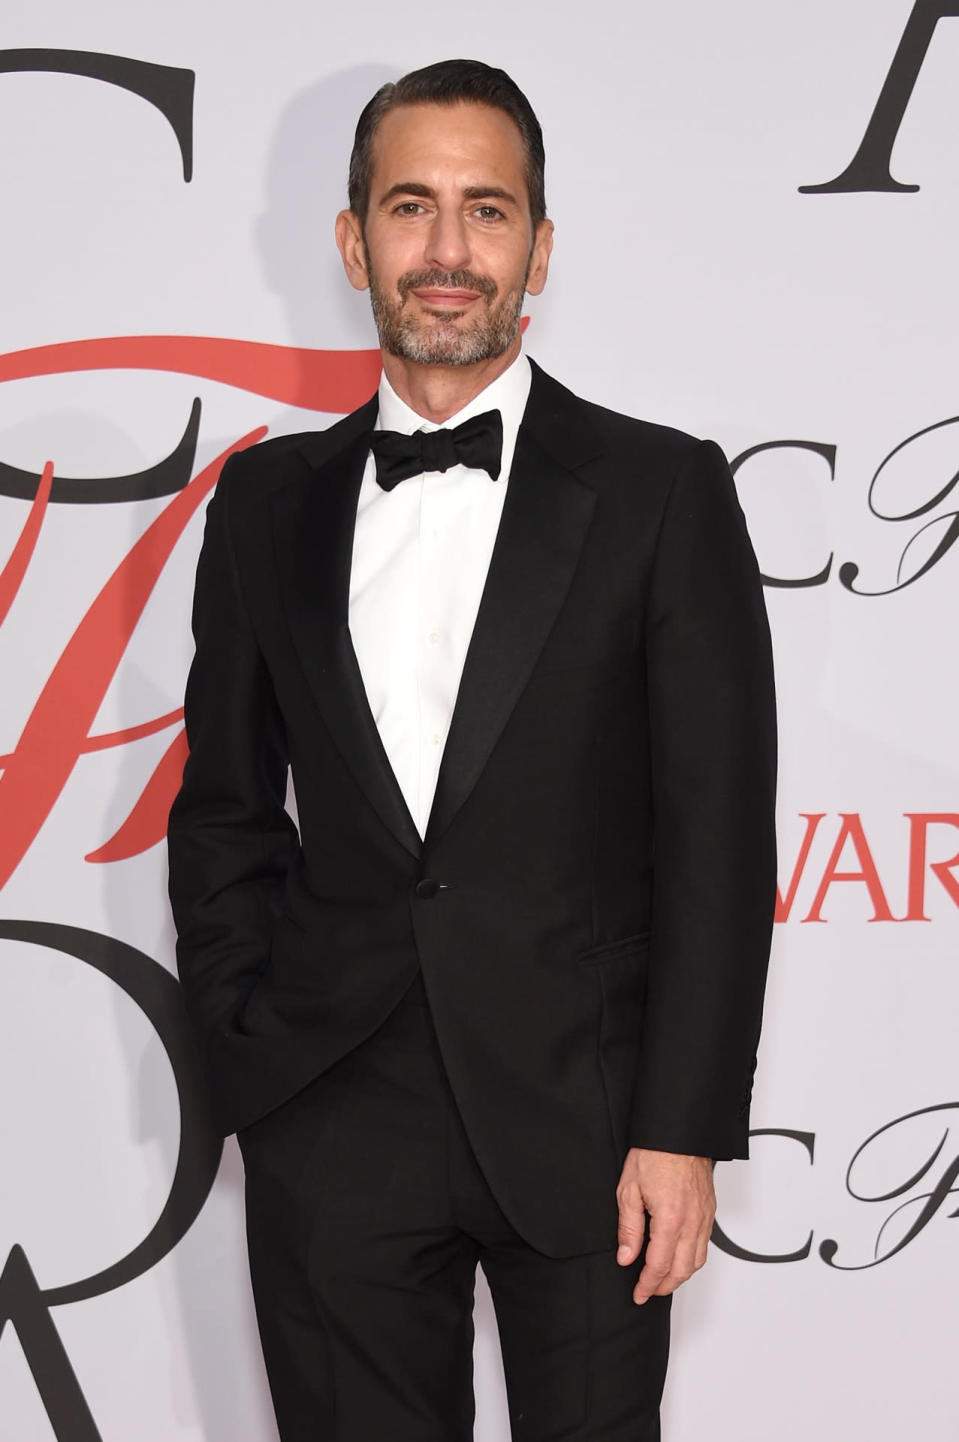 Marc Jacobs, CFDA Womenswear Designer of the Year.